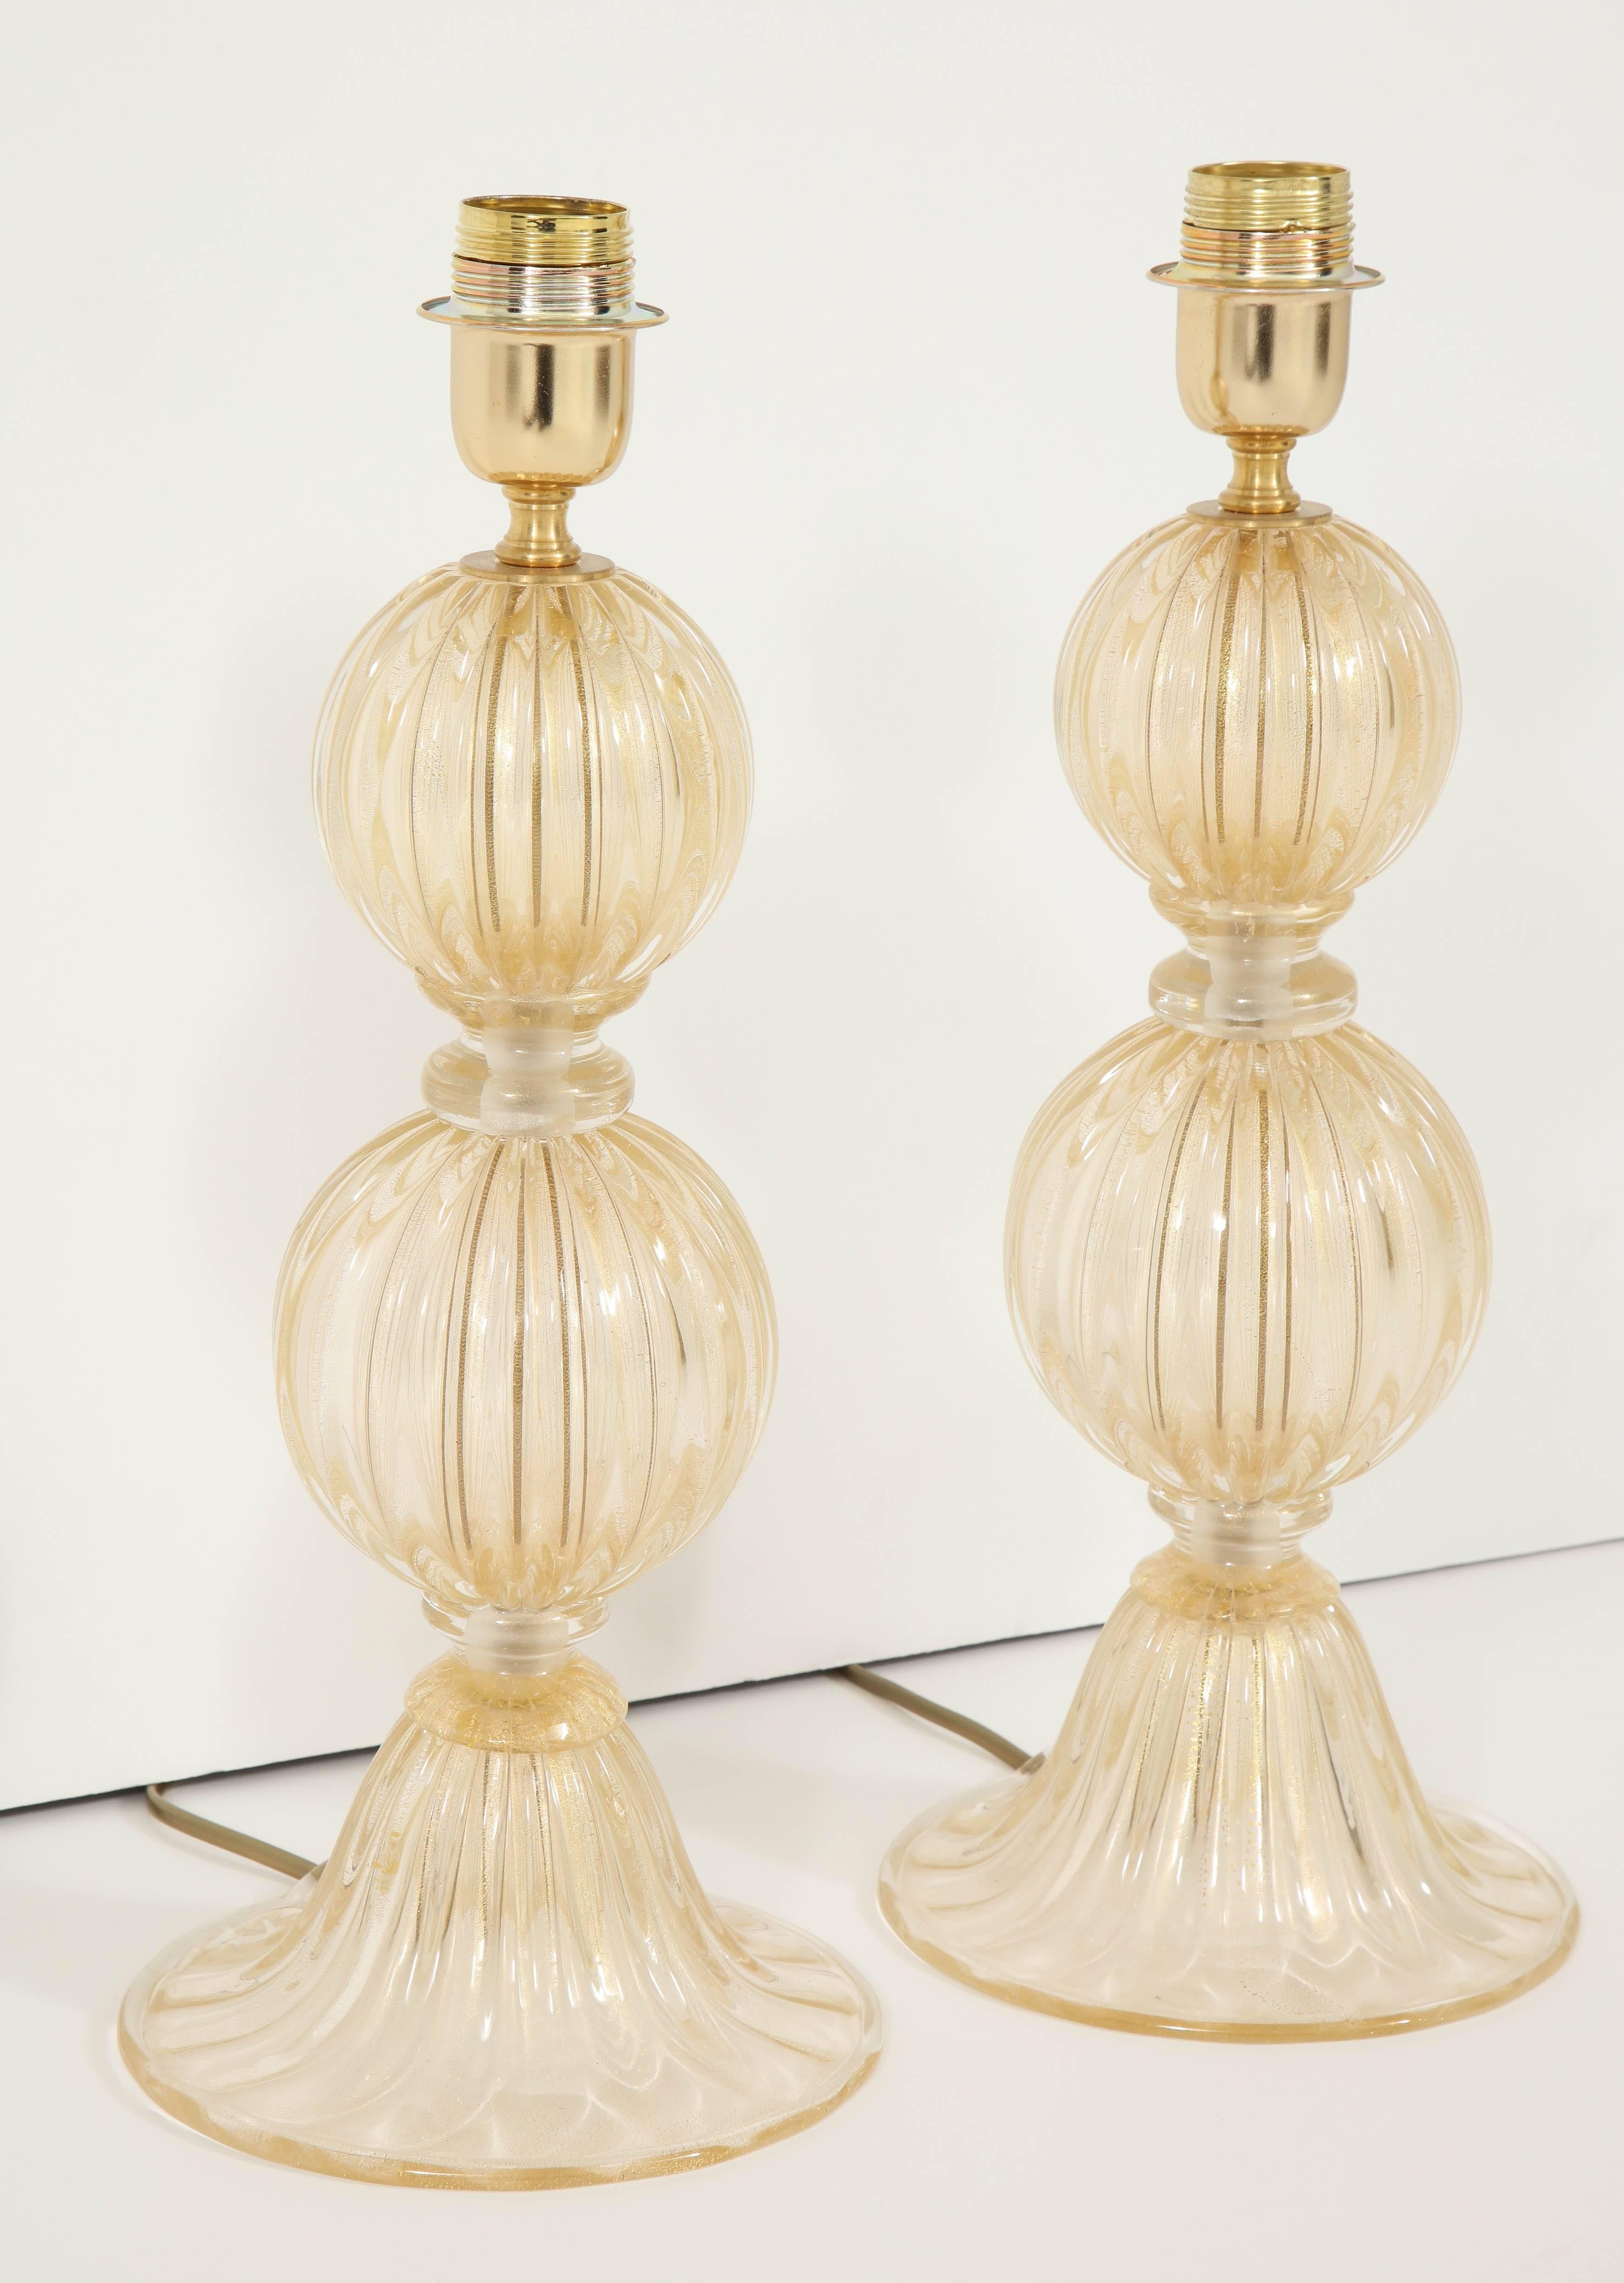 A stunning pair of Murano glass lamps composed of two sculpted globes separated by clear glass rings, decorated with gold leaf inclusions.